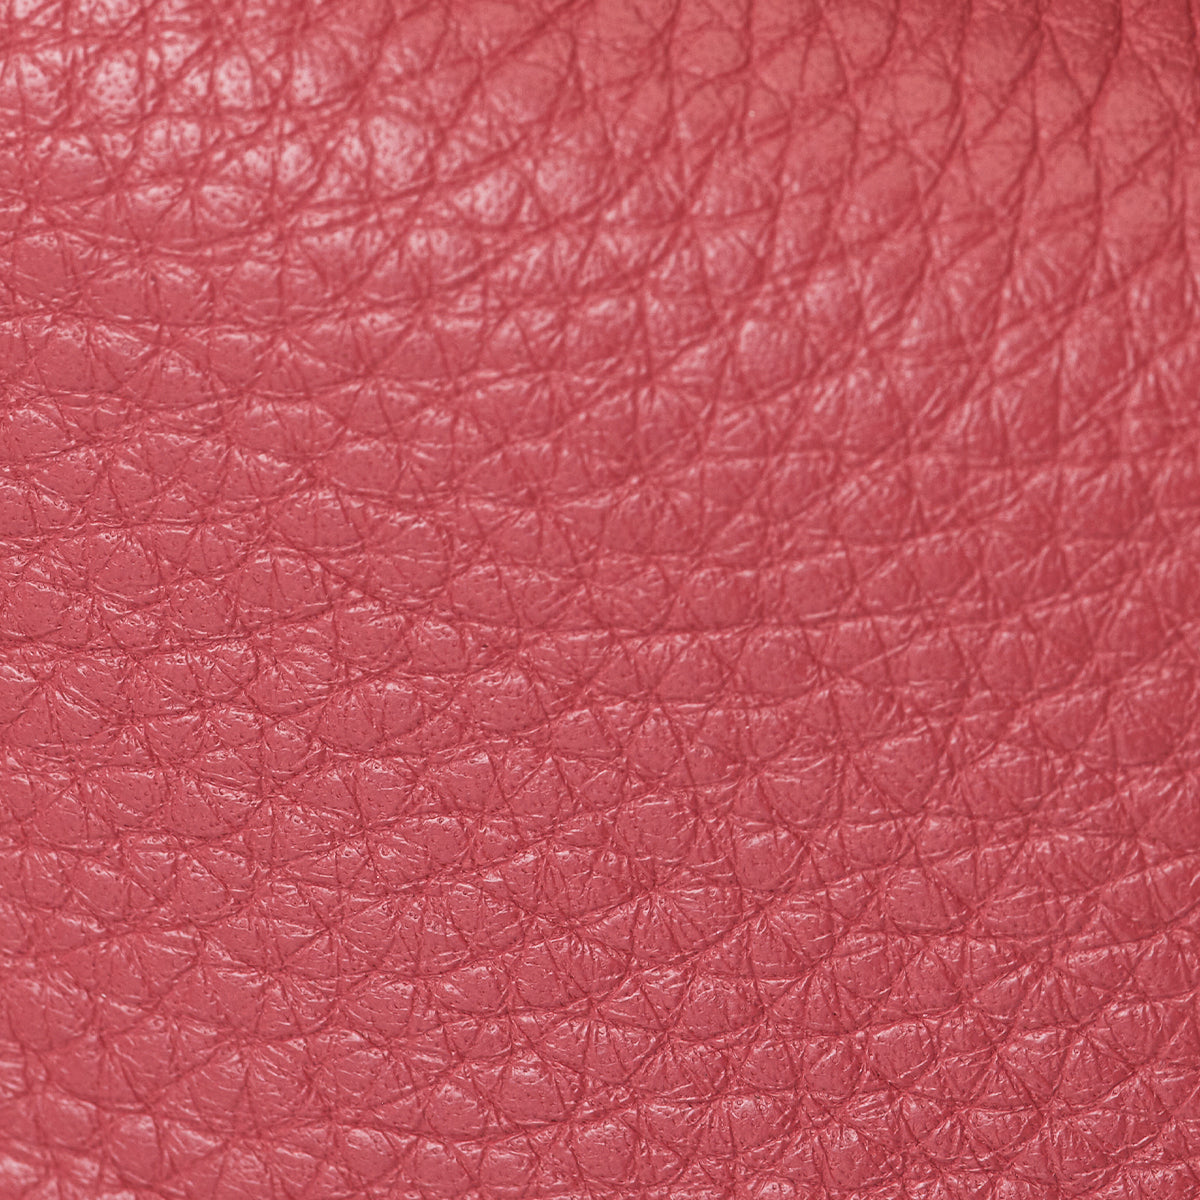 VIP-Satchel-Rouge-Pink-Leather-Swatch